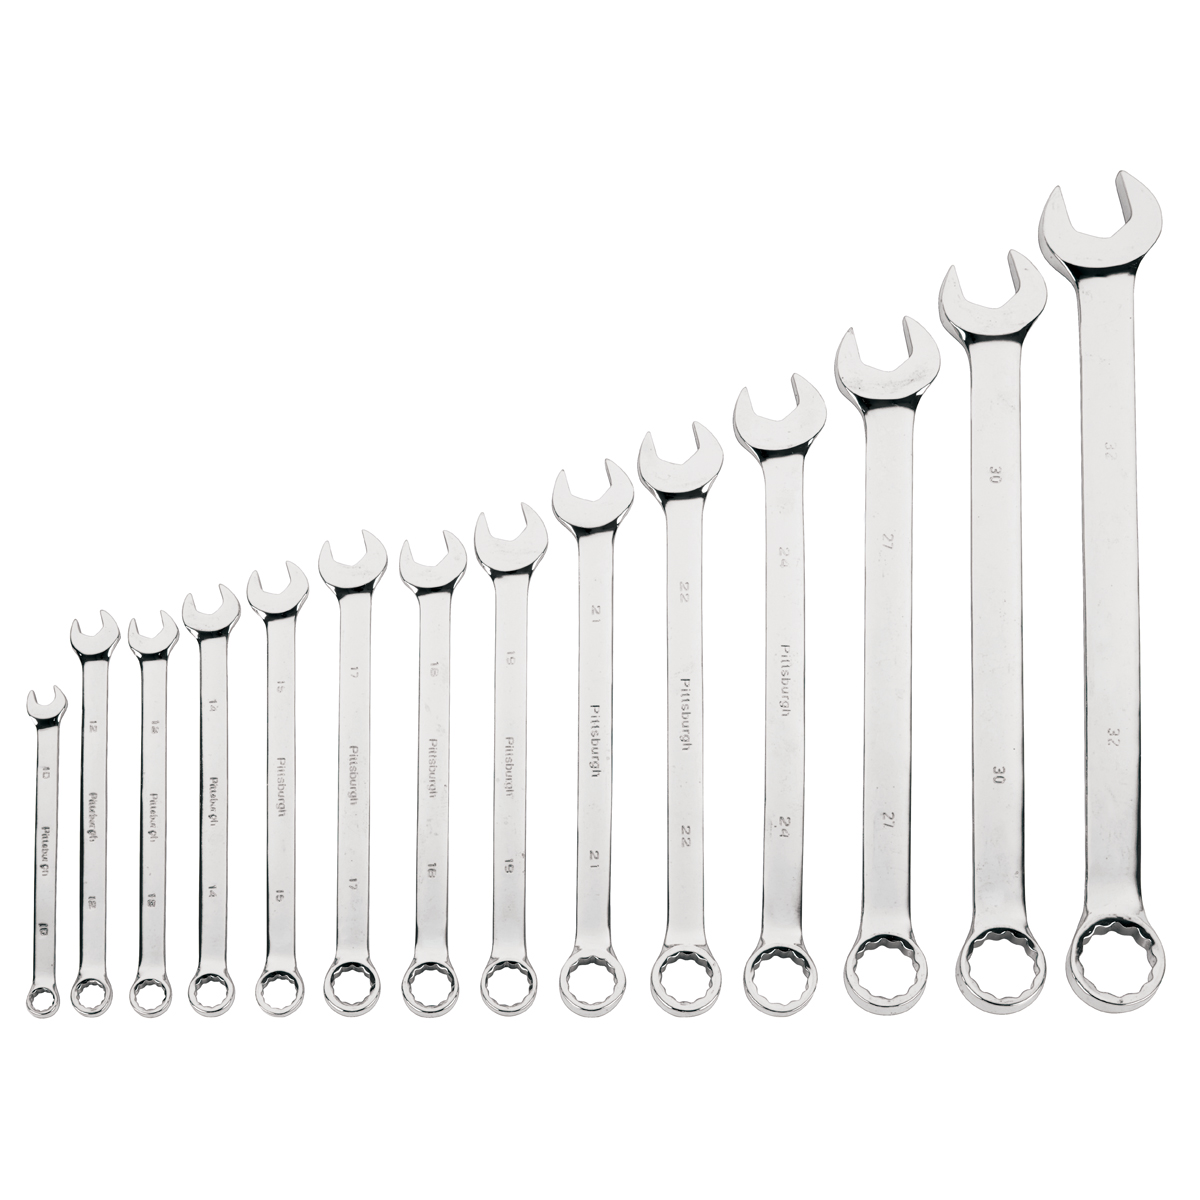 PITTSBURGH Metric V-Groove Combination Wrench Set 14 Pc. - Item 63063 / 64363